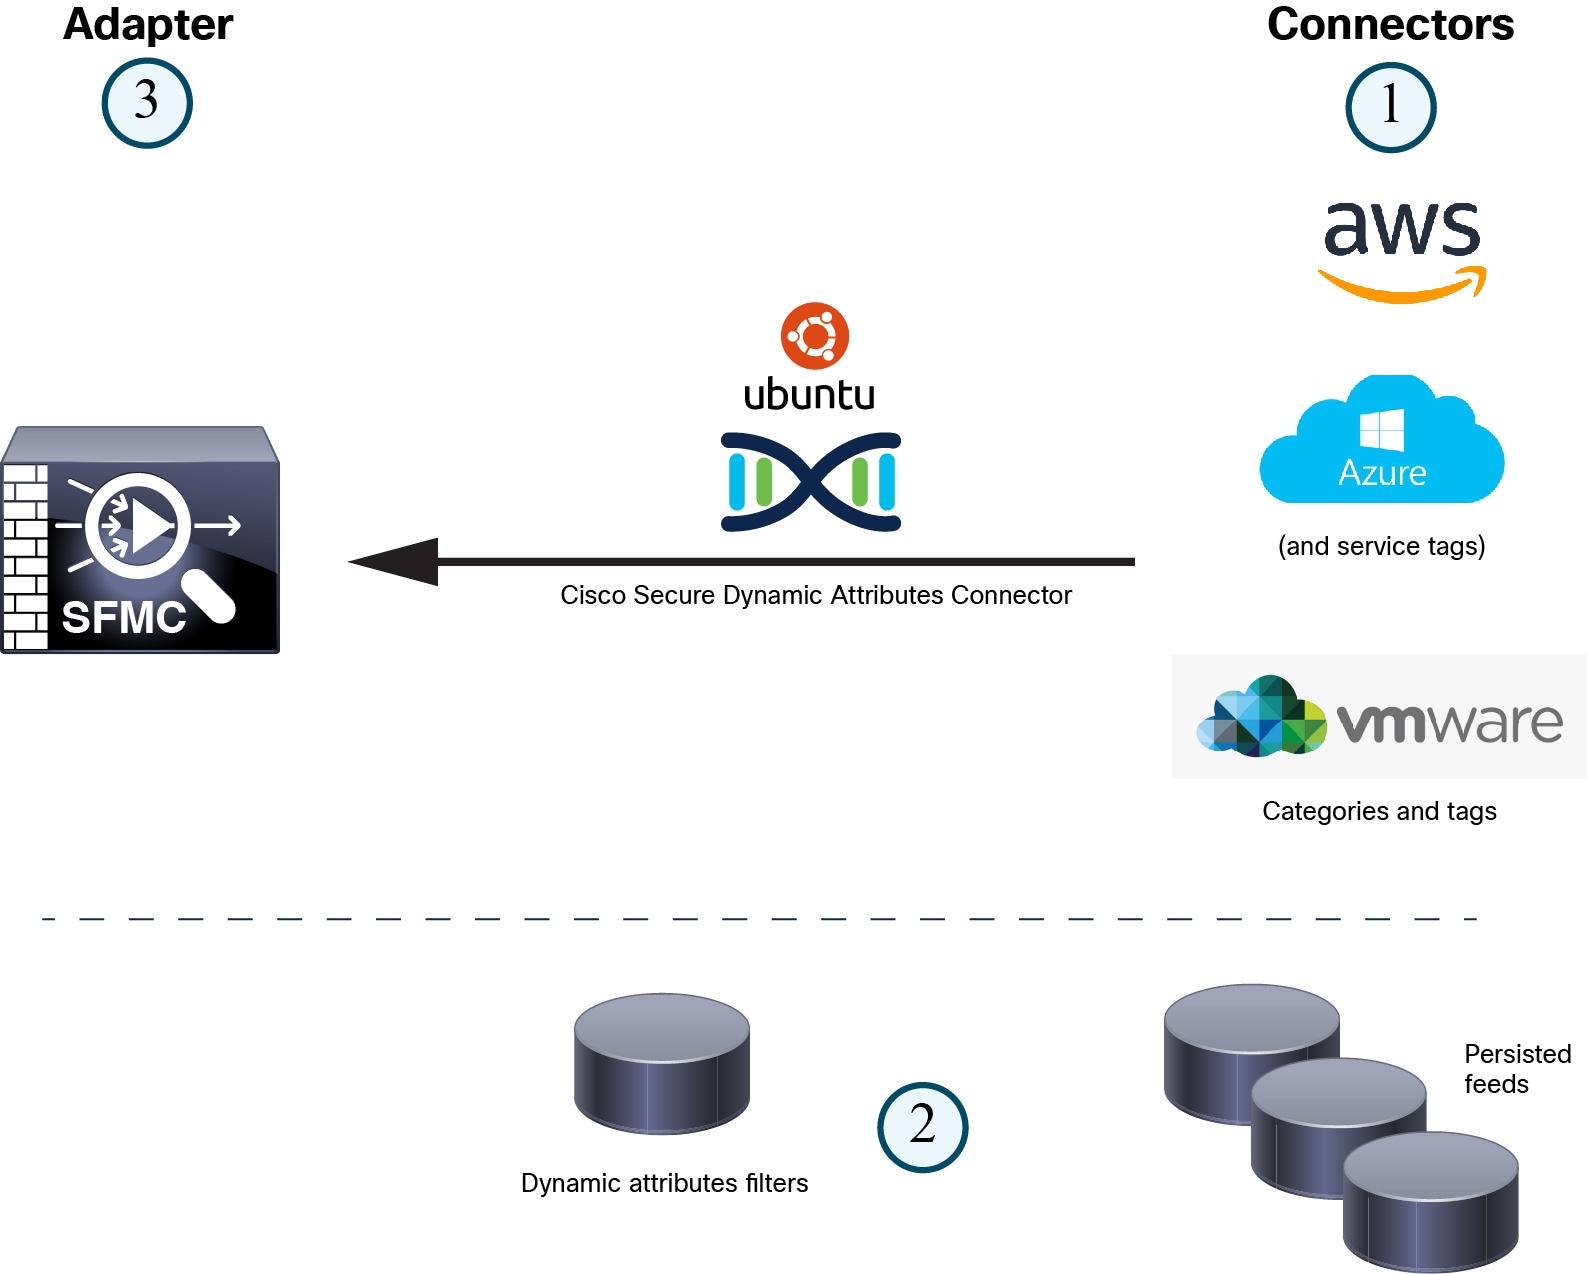 "The Cisco Secure Dynamic Attributes Connector queries cloud services such as VMware vCenter and provides information such as VLANs, networks, and tags to the FMC to use as selection criteria in access control rules. This way, you don't have to constantly update FMC network objects when IP address information (for example) in your cloud systems change"